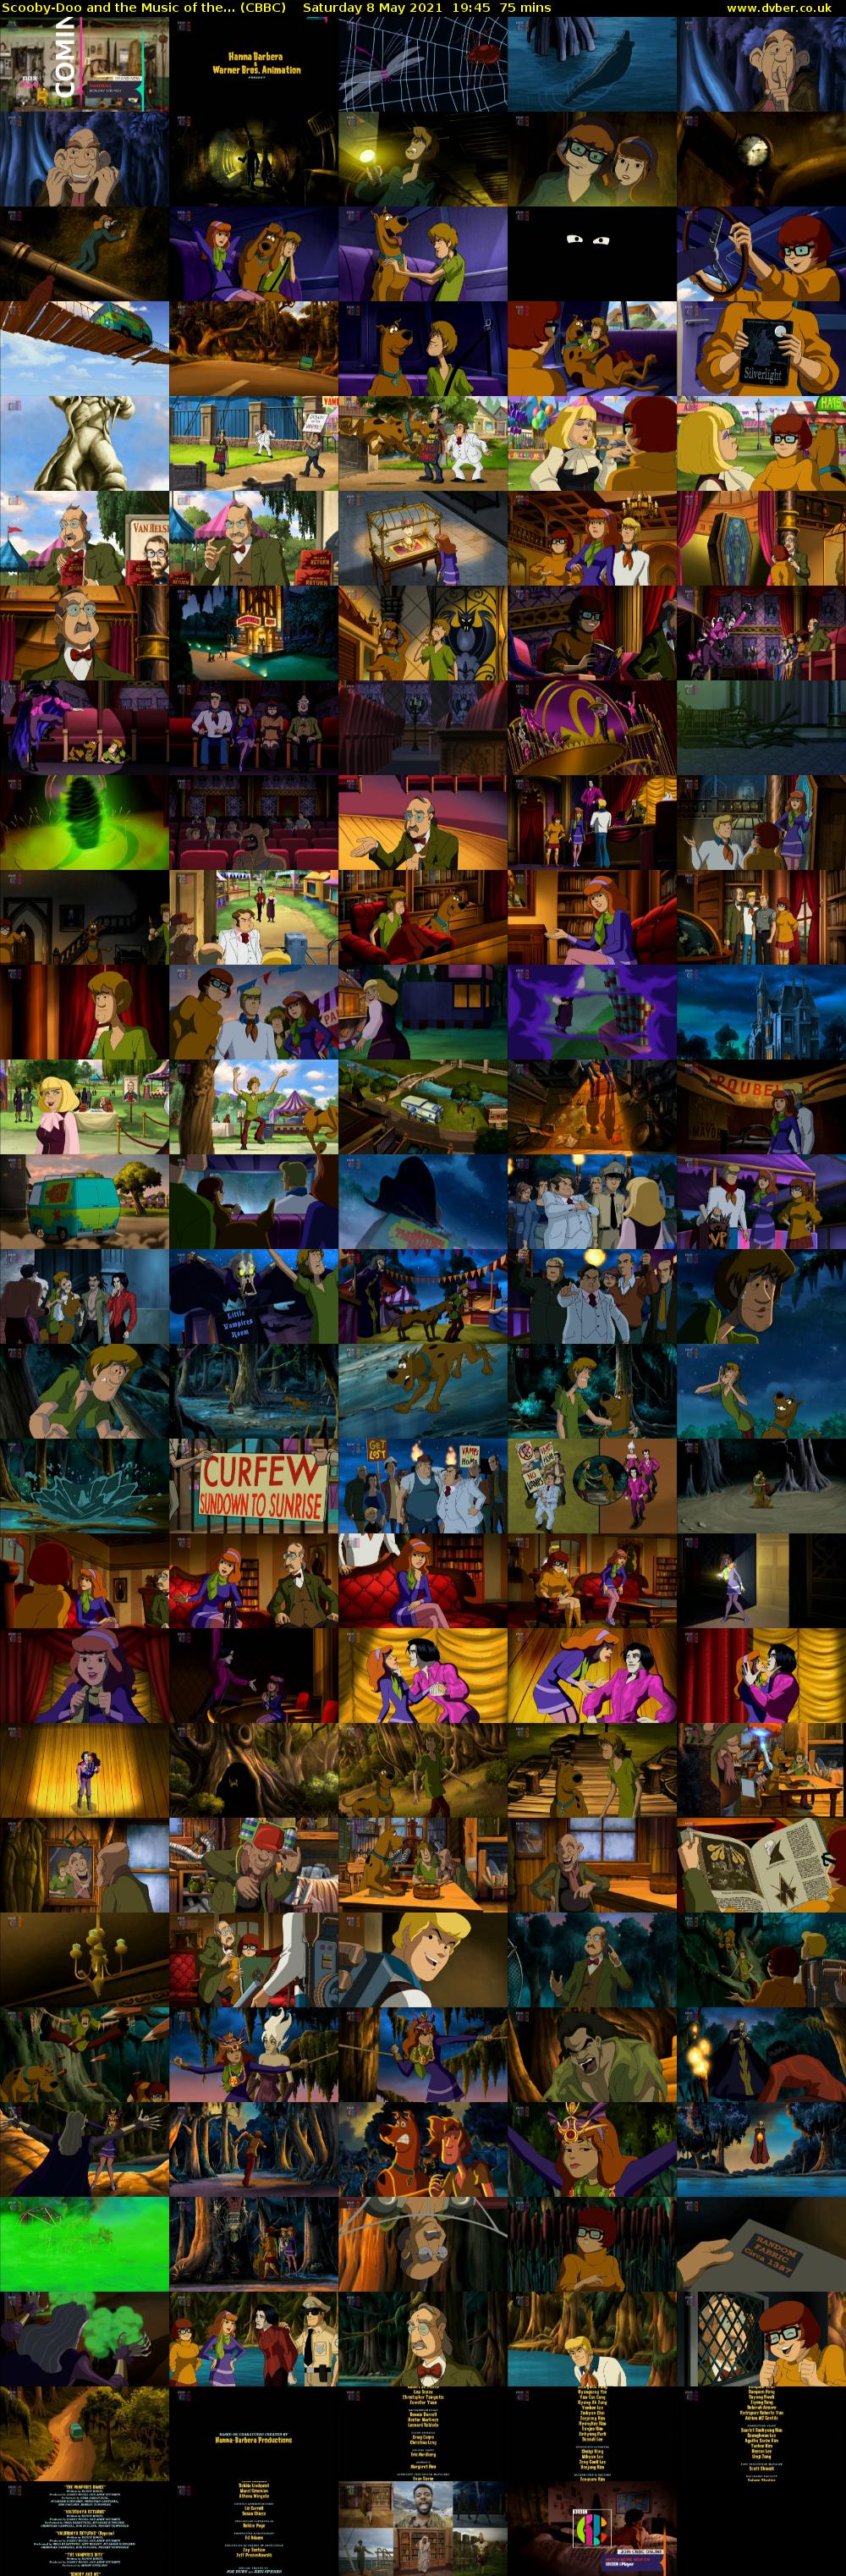 Scooby-Doo and the Music of the... (CBBC) Saturday 8 May 2021 19:45 - 21:00